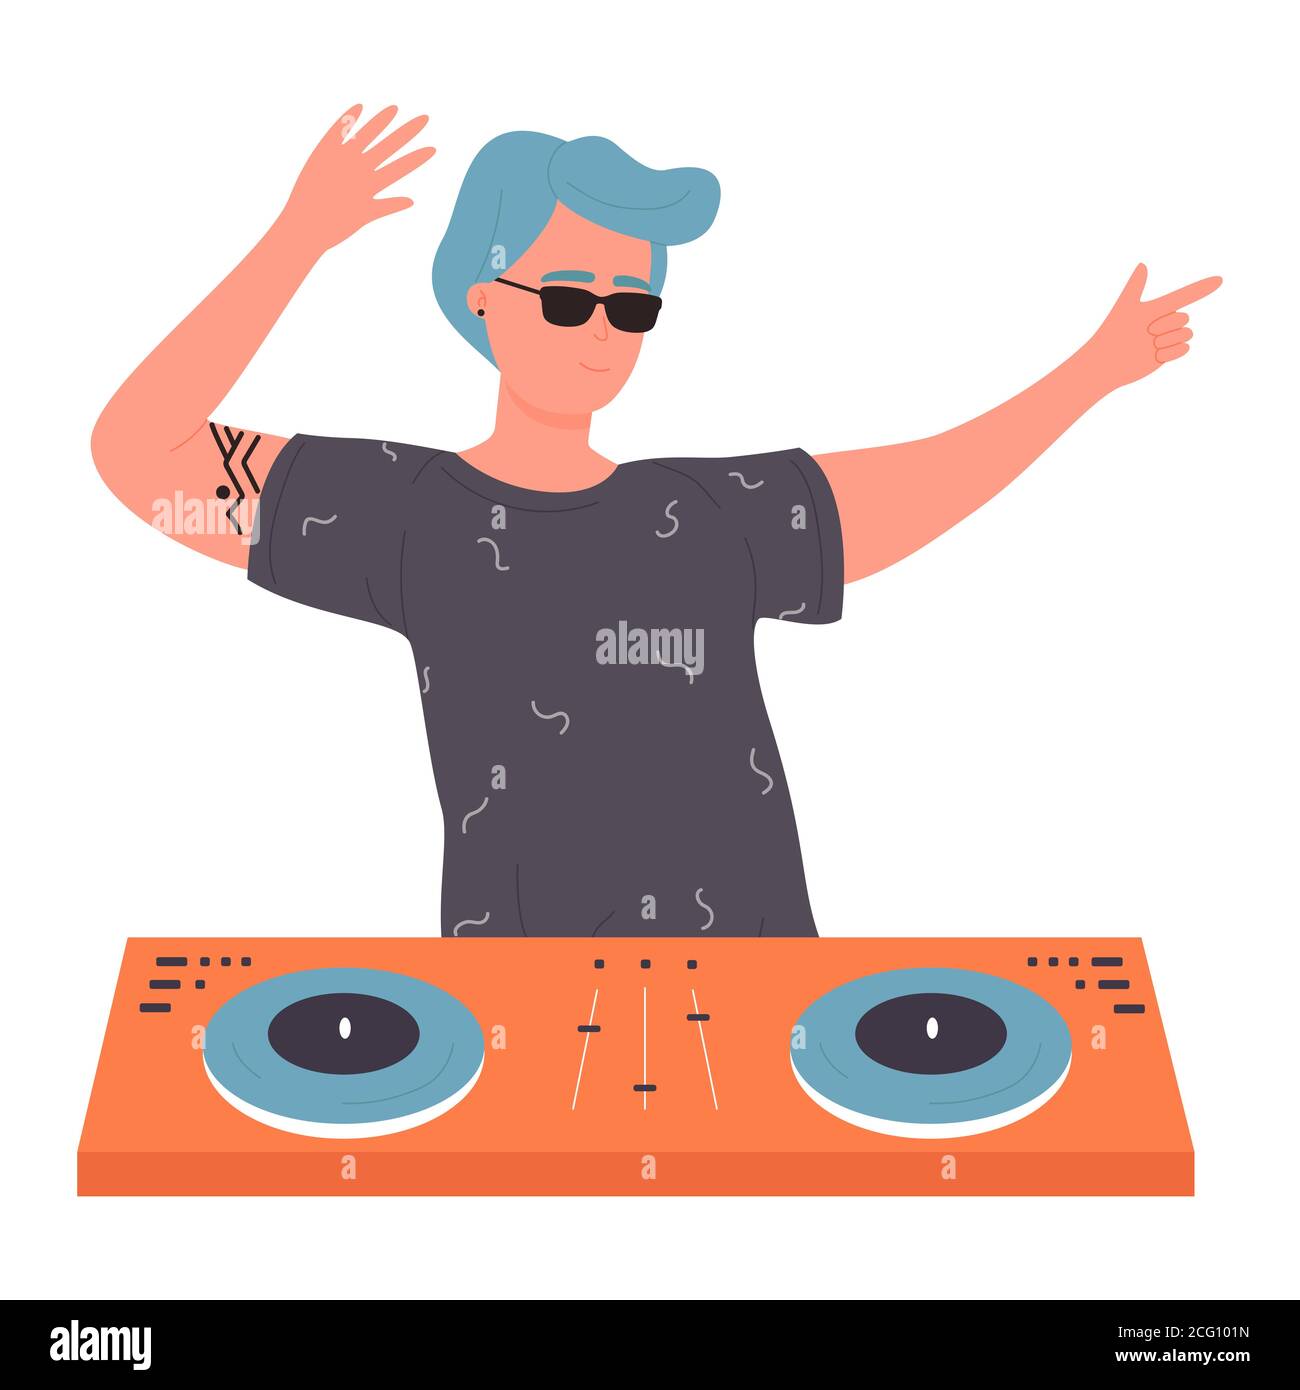 DJ young man with sunglasses on musical party vector illustration. Cartoon flat male dancing DJ character with turntable mixer making contemporary music in night club, spinning disc isolated on white. Stock Vector